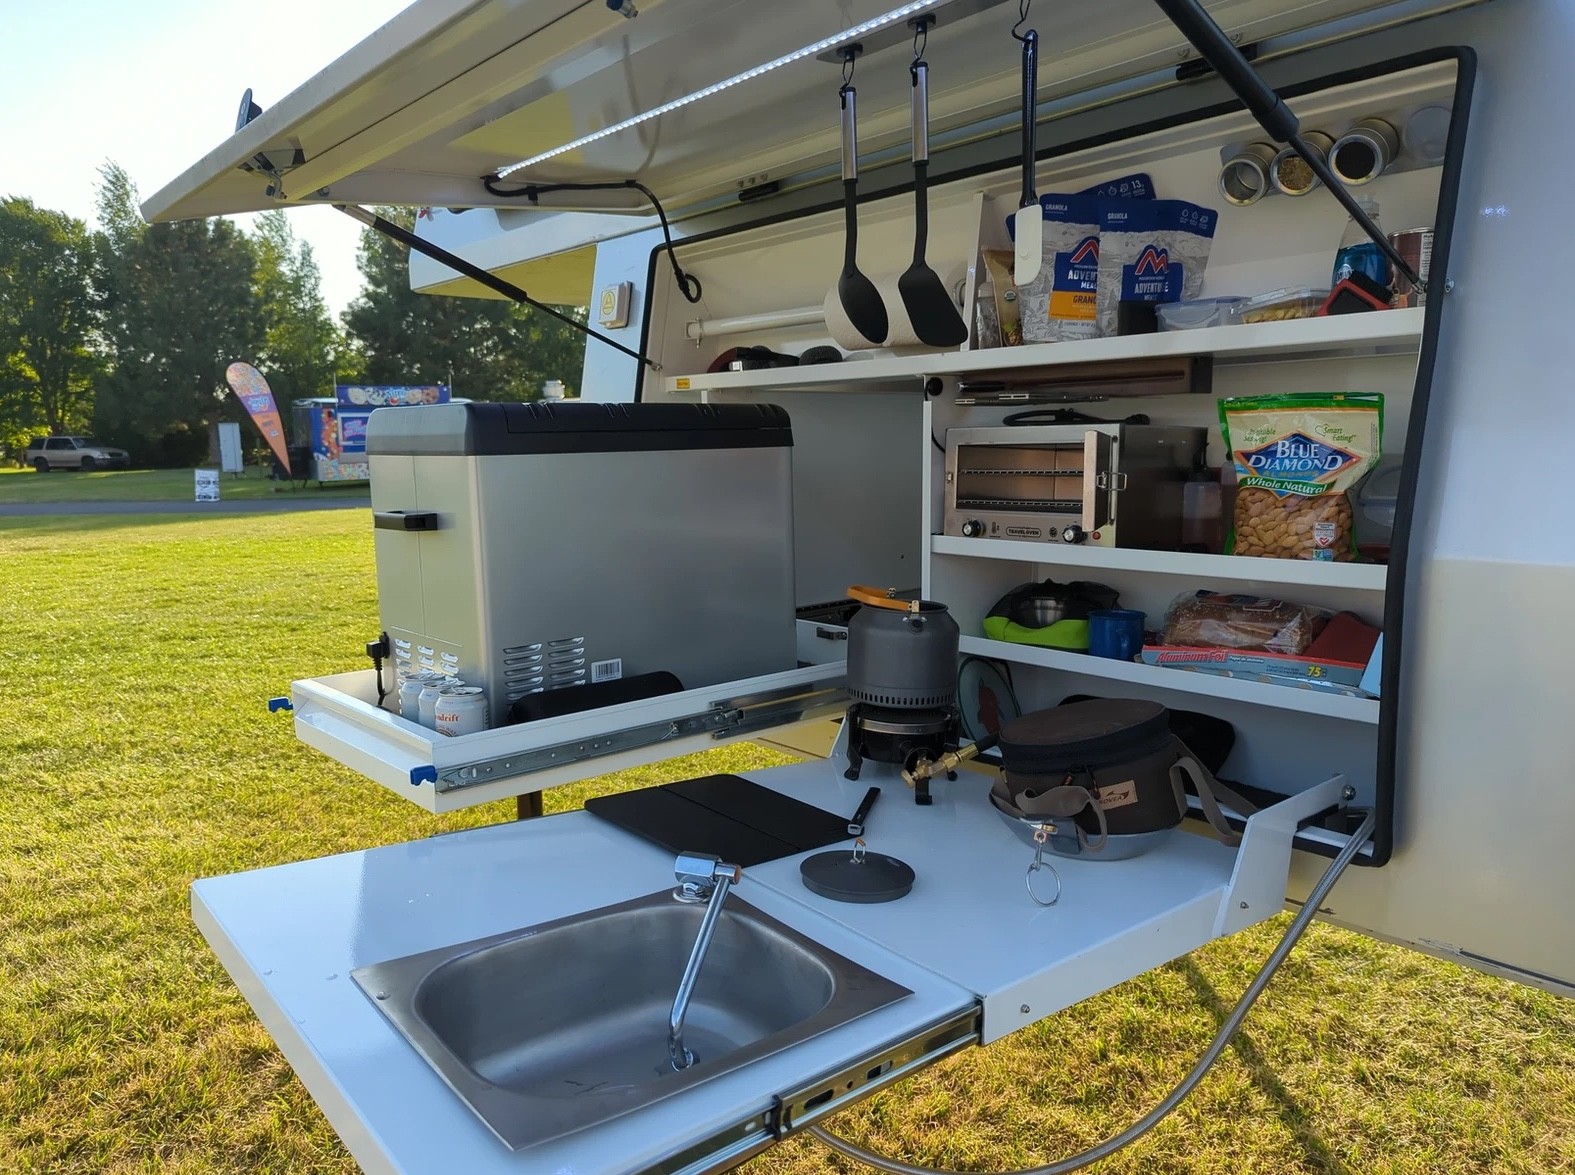 Compact but Functional Gullwing Flatbed Pop-Up Camper Is Ultra-Light ...